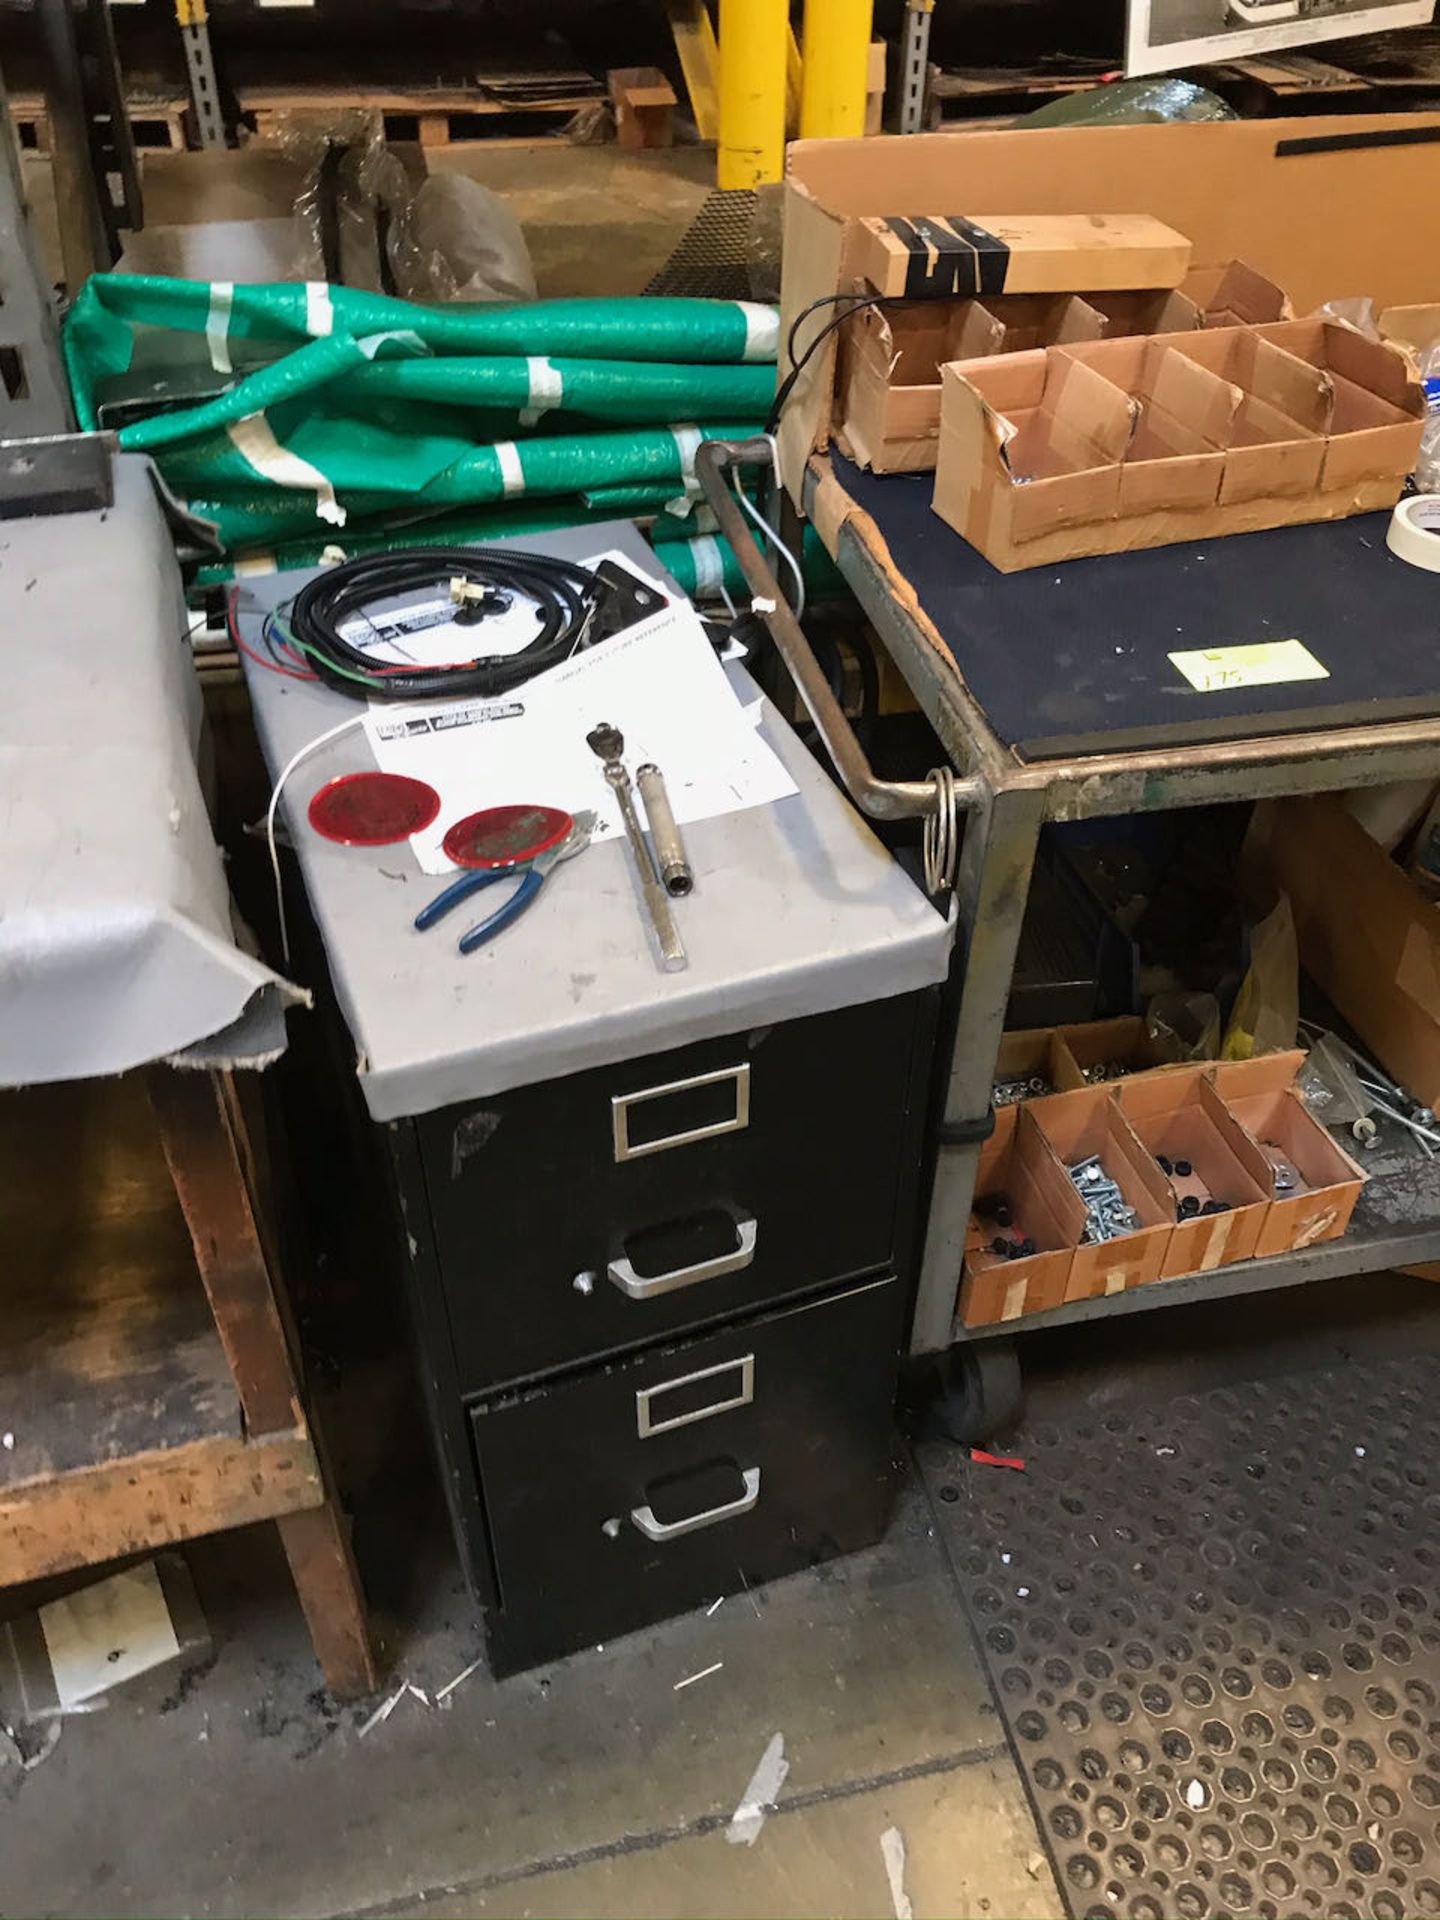 Work table with air tools and file cabinet - Image 2 of 2